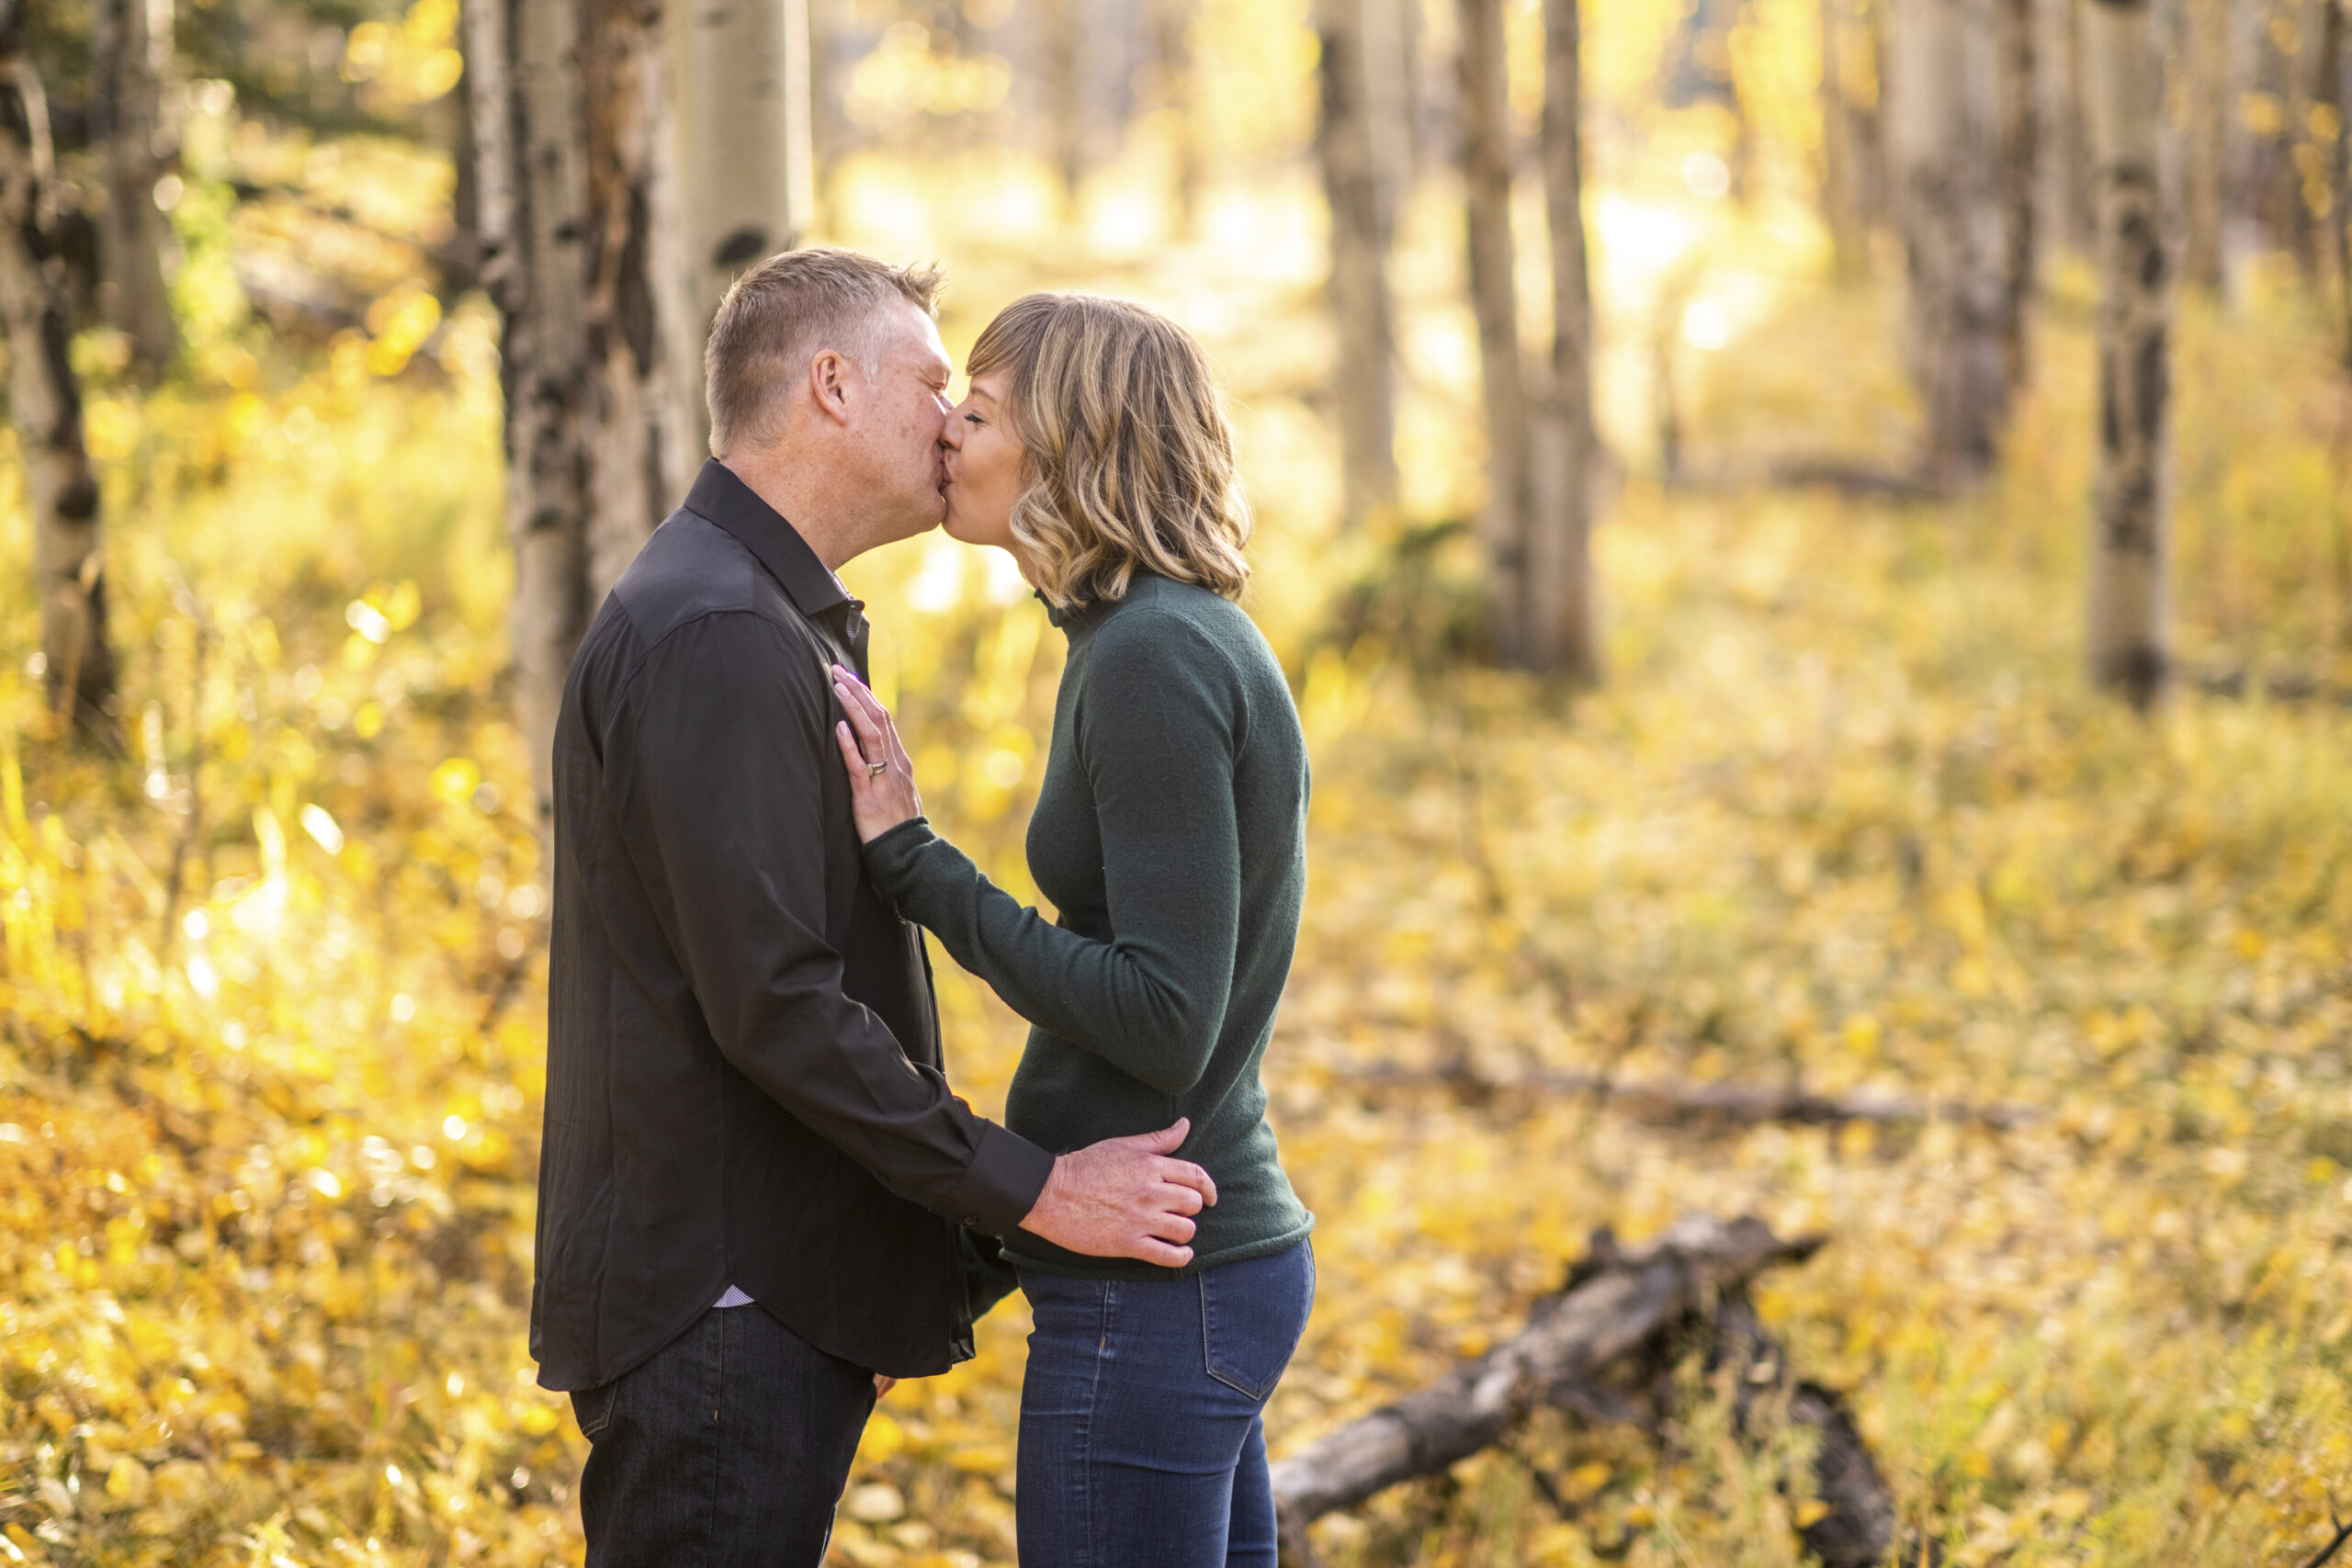 A woman in a green shirt and jeans kisses a man in a black shirt and jeans surrounded by yellow leaves during an engagement session at Meyer Ranch Park in Colorado.